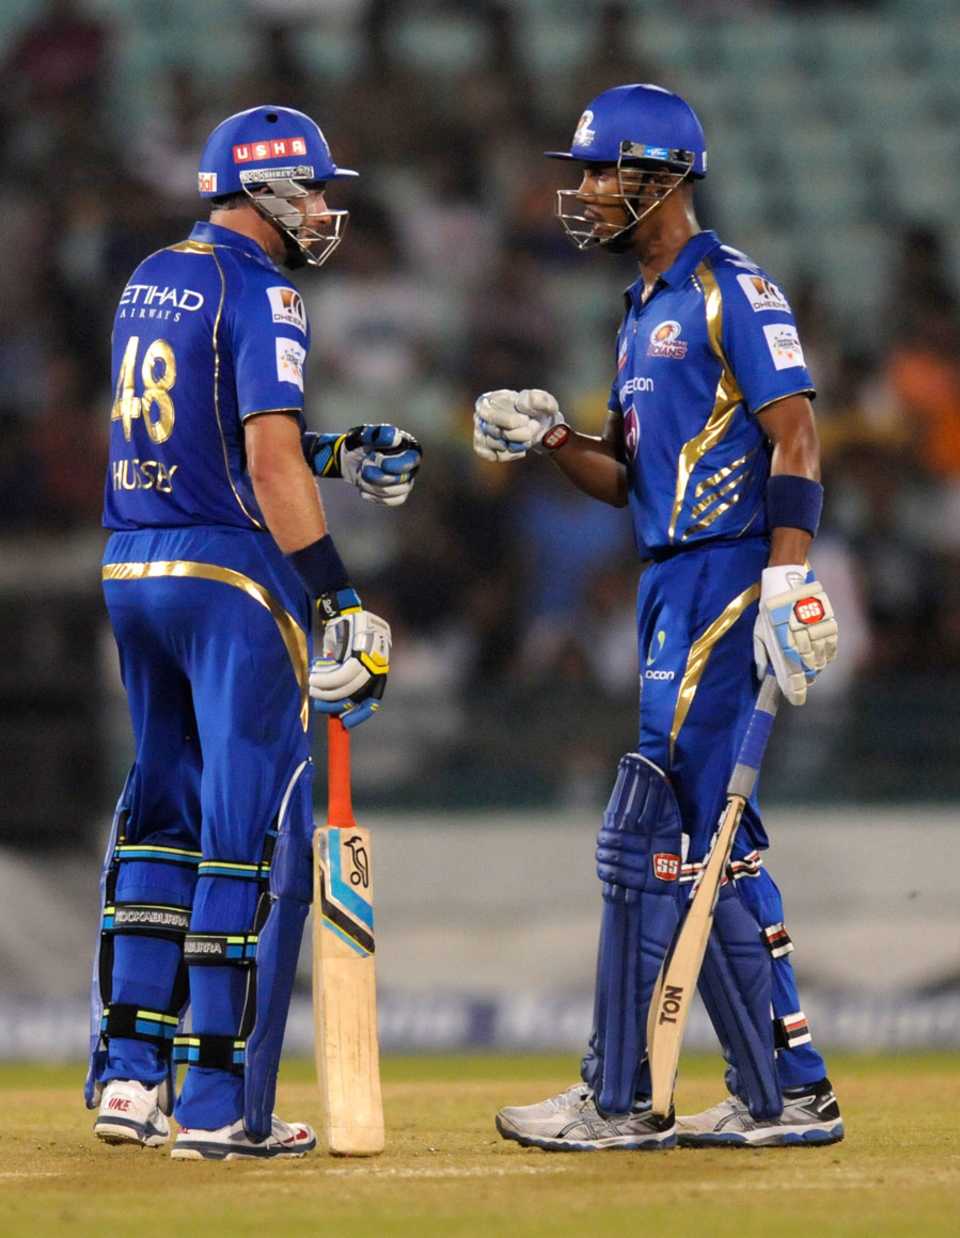 Michael Hussey and Lendl Simmons added 139 runs for the first wicket, Mumbai Indians v Southern Express, CLT20, Raipur, September 14, 2014